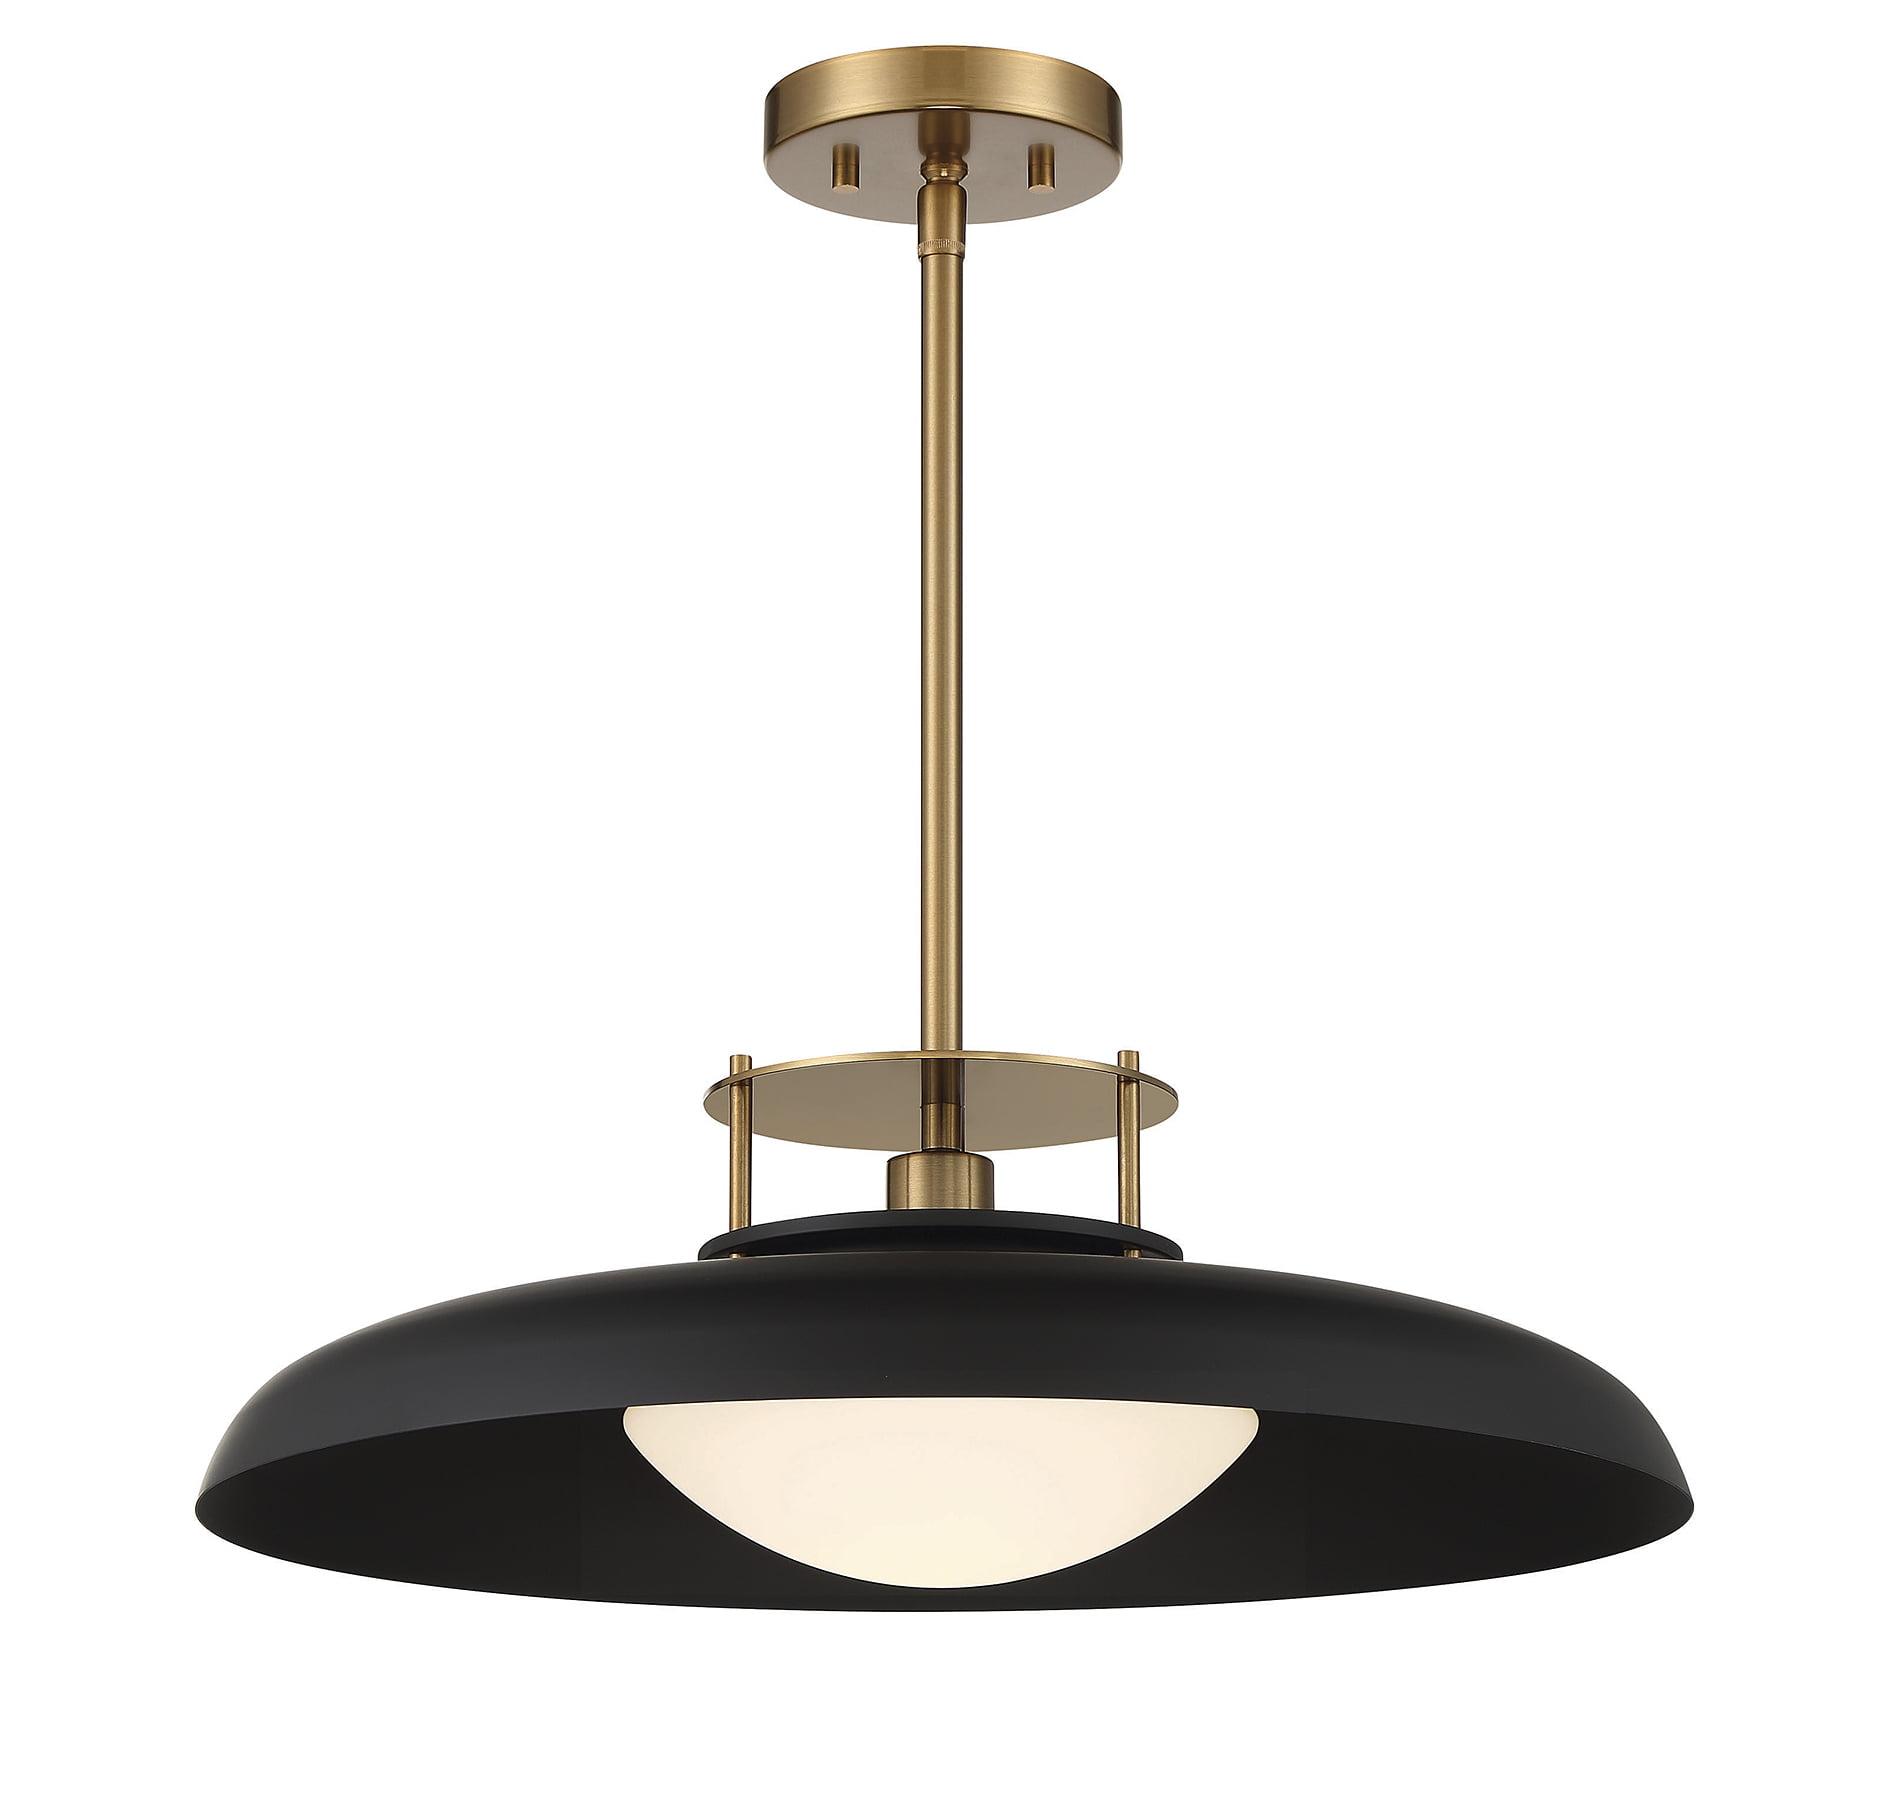 Matte Black and Warm Brass Vintage Pendant Light with Opal Glass Shade